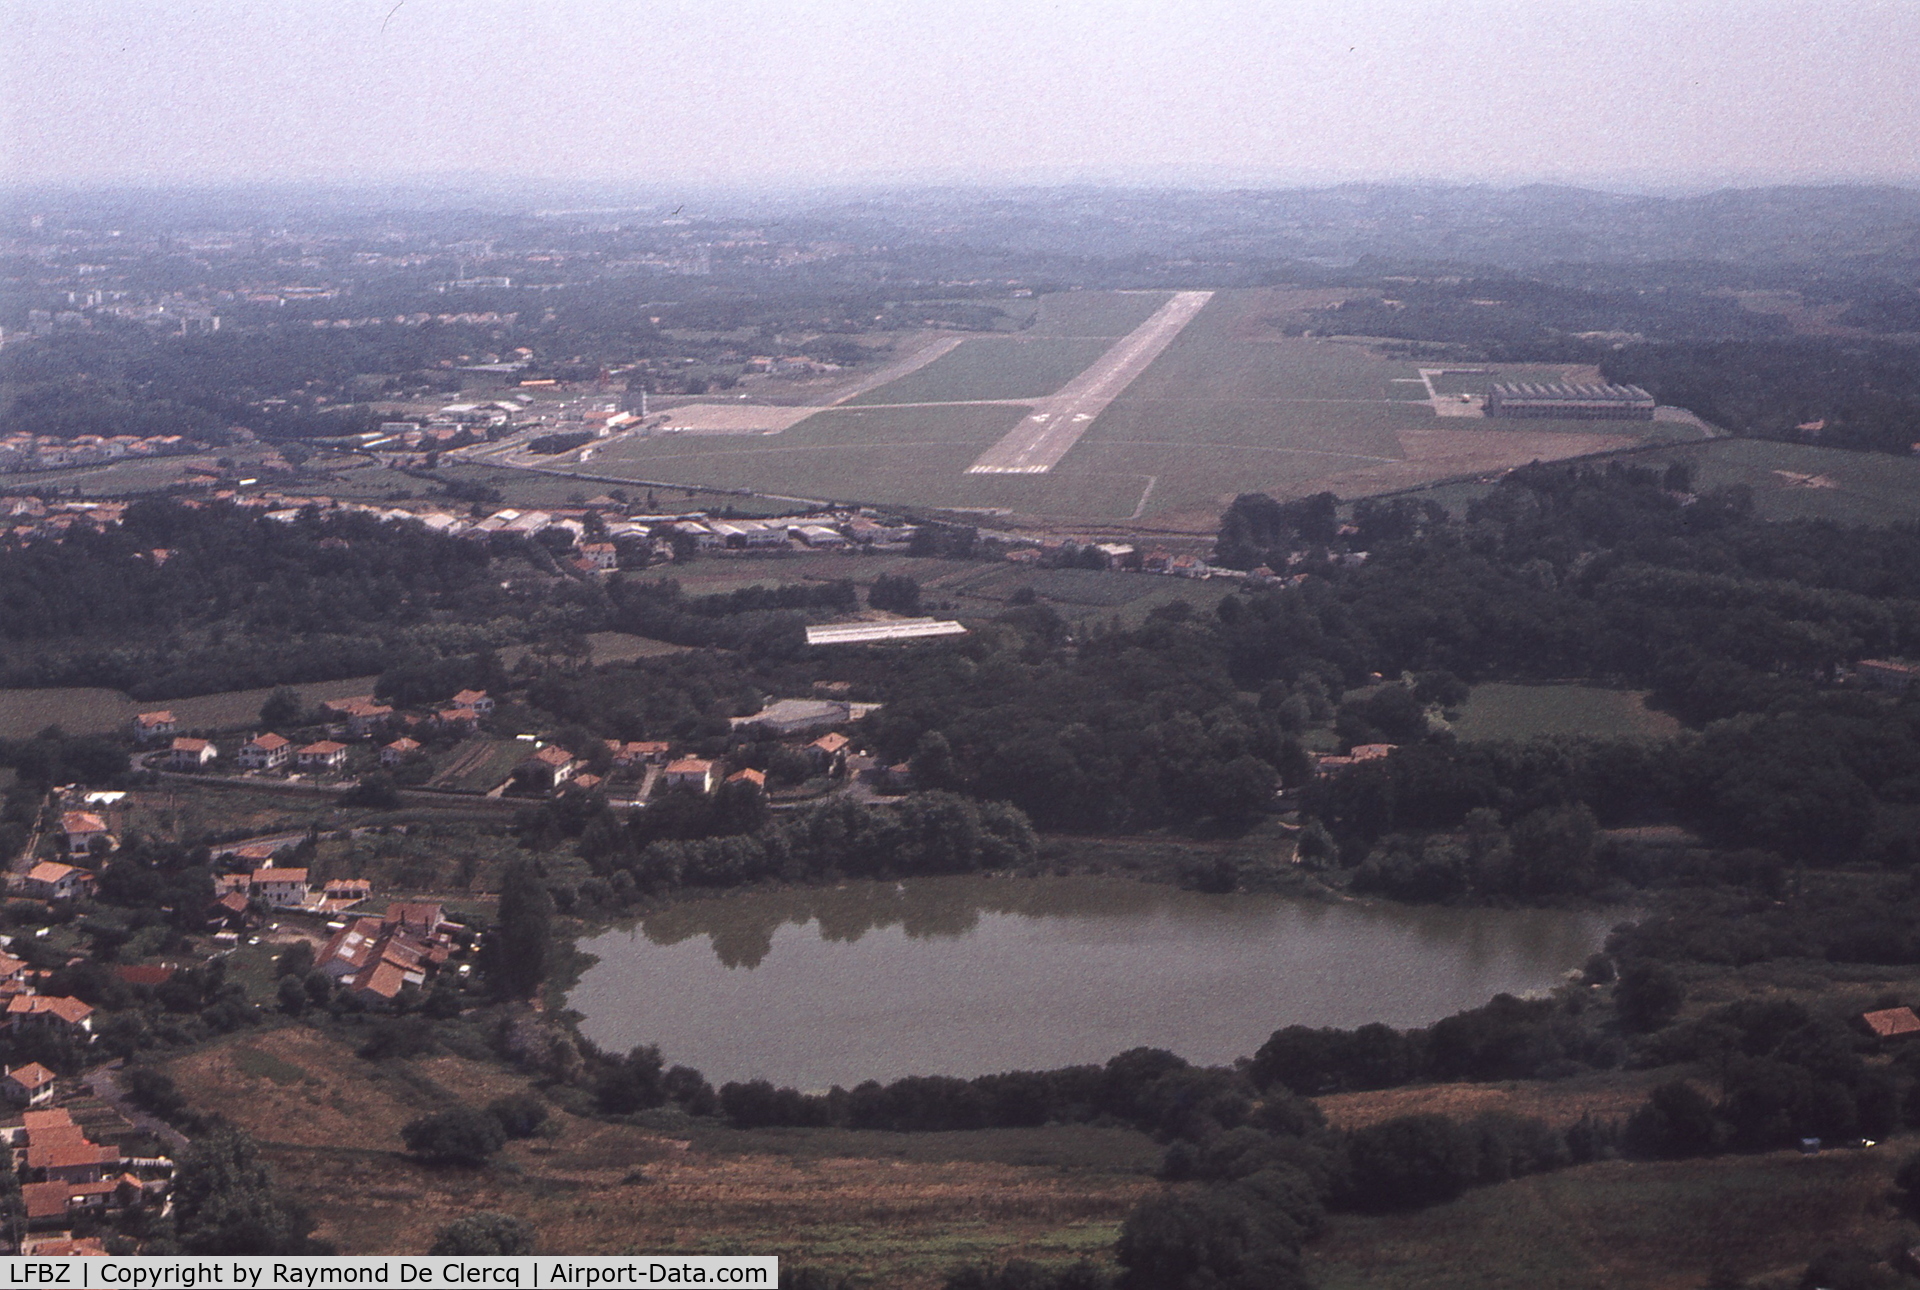 Biarritz-Bayonne Airport, Anglet Airport France (LFBZ) - On final to rwy 10  (currently 09) in July 1976.